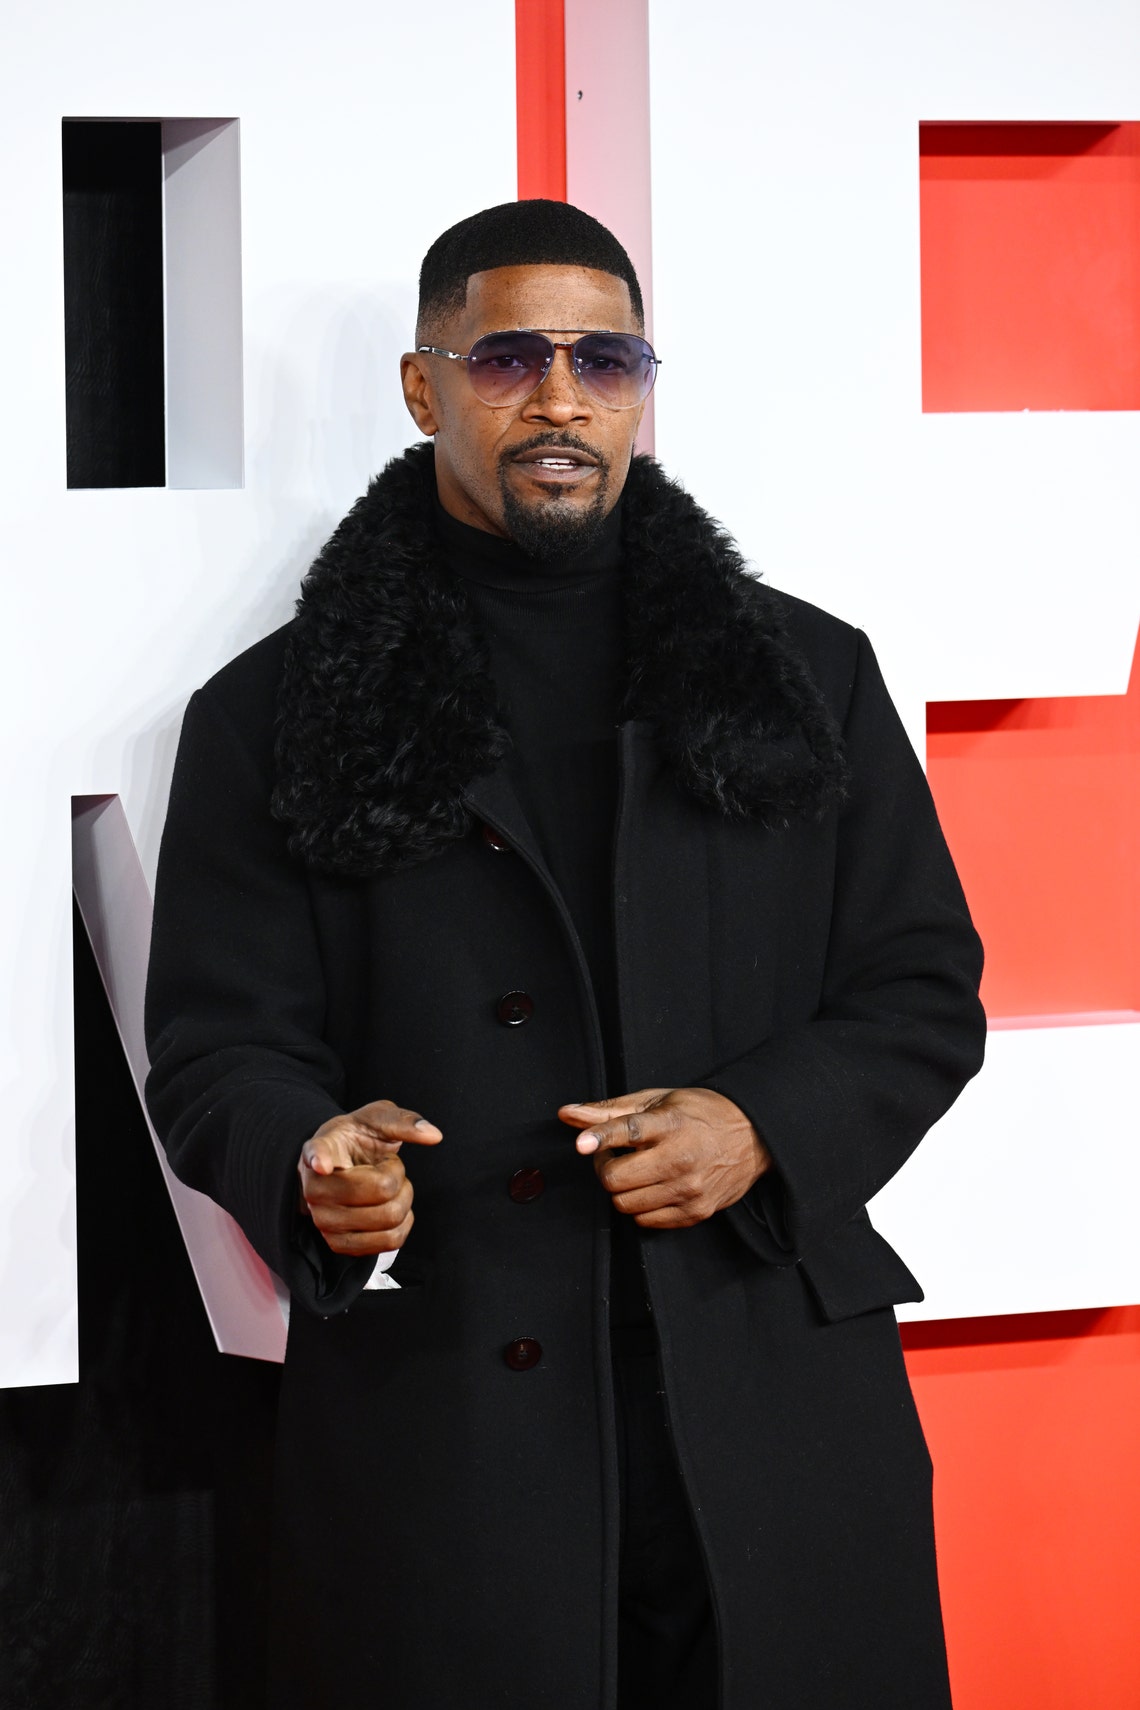 TooFab's Week In Celebrity Photos: February 19 - February 25